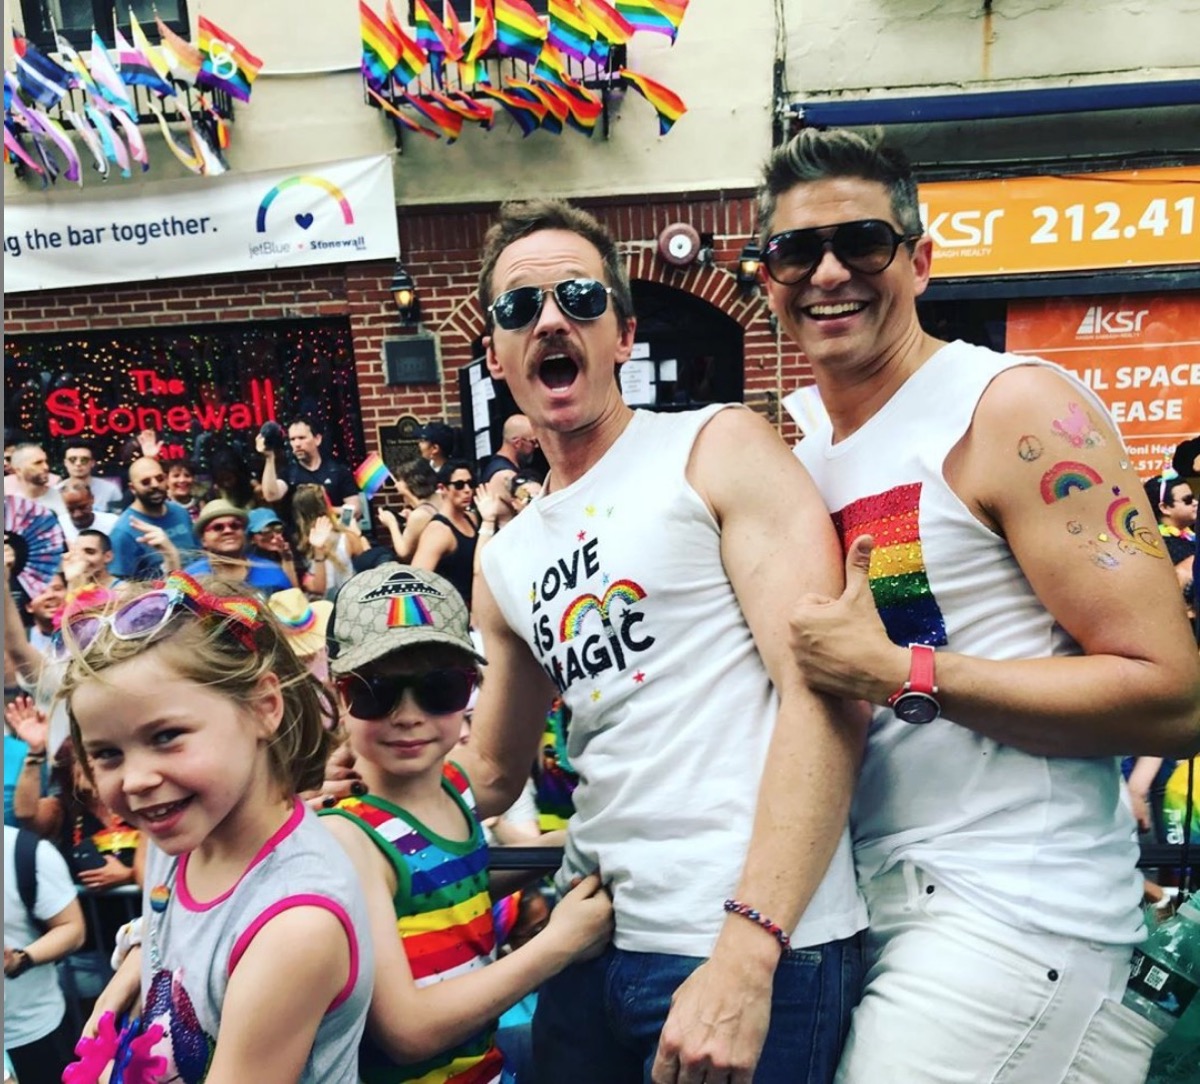 neil patrick harris, david burtka, and their two children in front of the stonewall inn at nyc pride